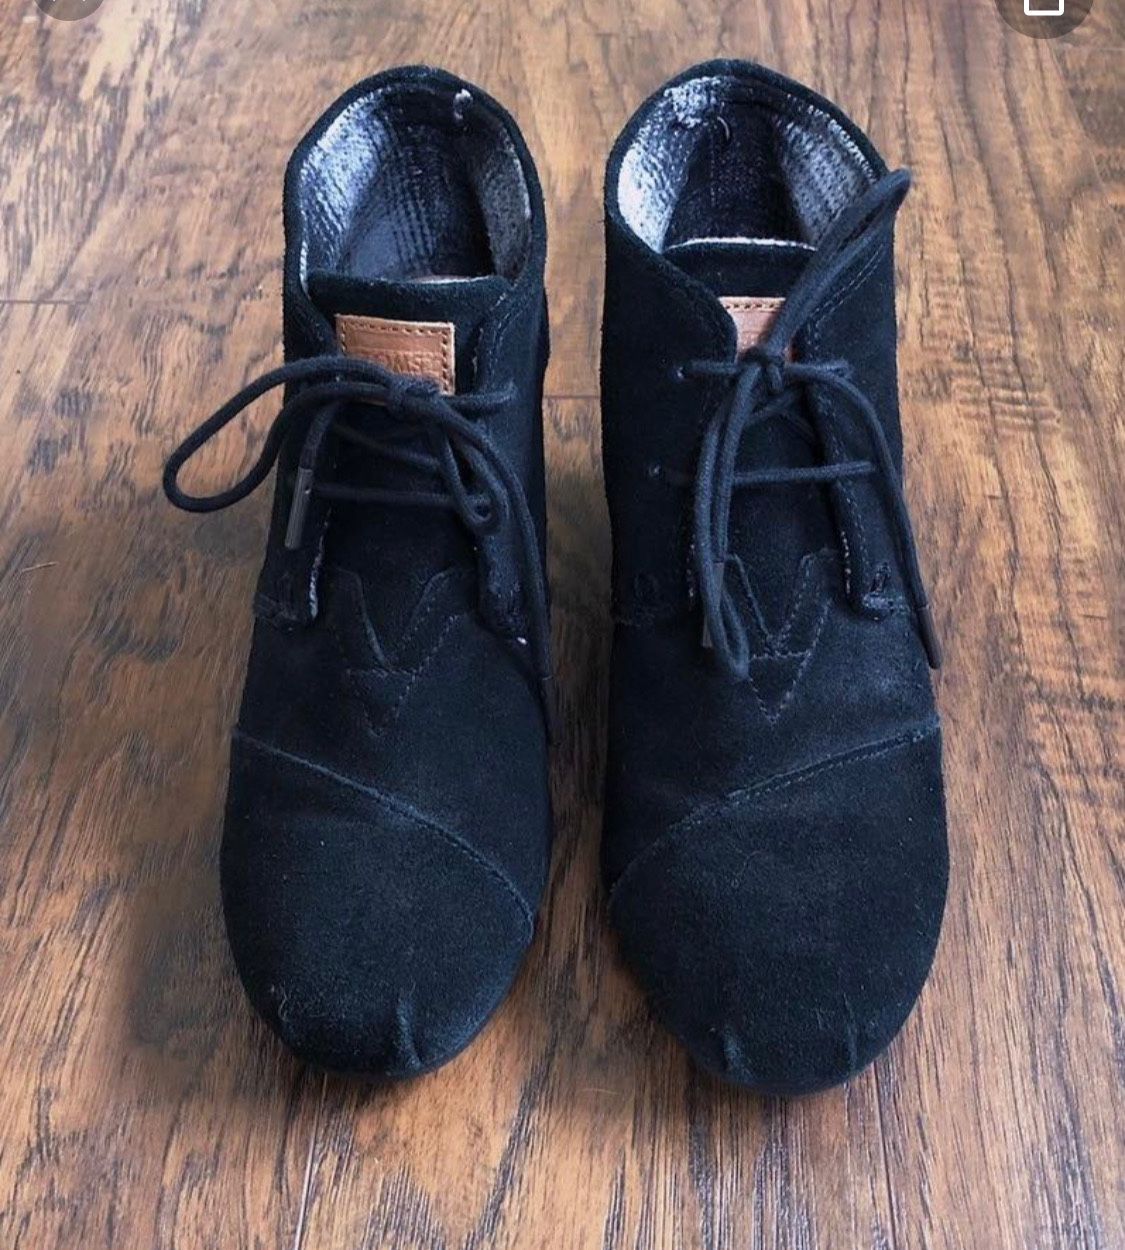 Toms Desert Wedge Booties Lace Up Black Suede - Toms size 8 women